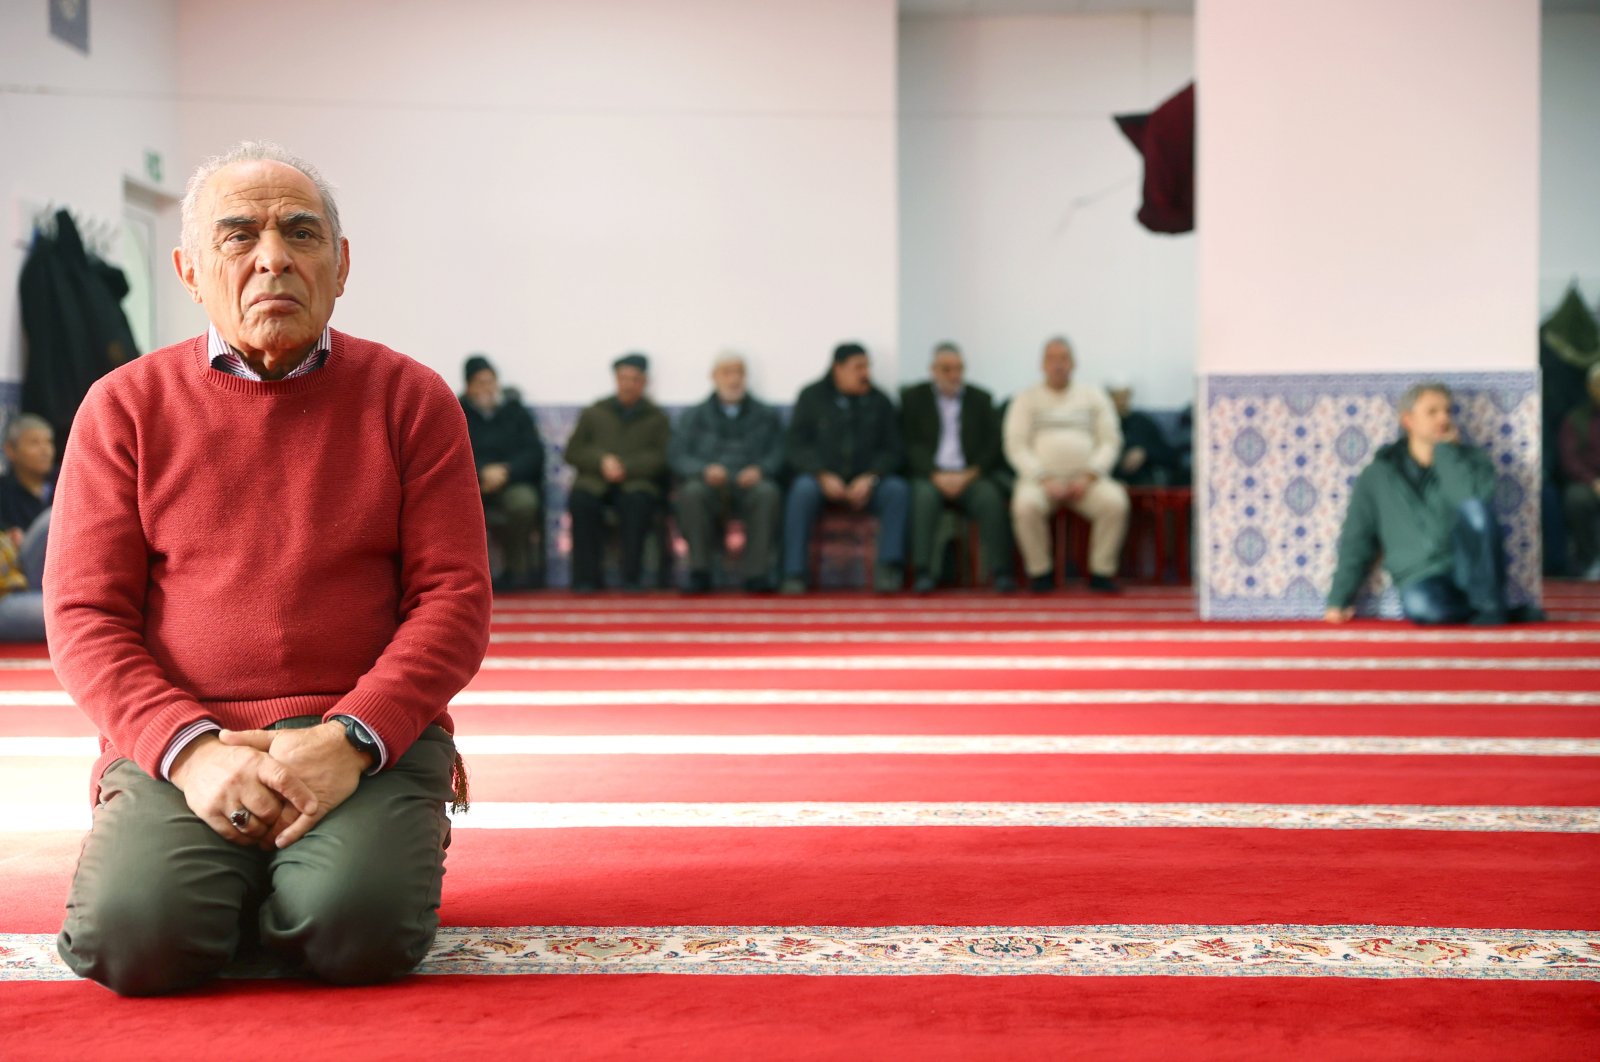 Men attend the Friday prayer following a shooting, at the mosque in Hanau, near Frankfurt, Germany, Feb. 21, 2020. (Reuters Photo)